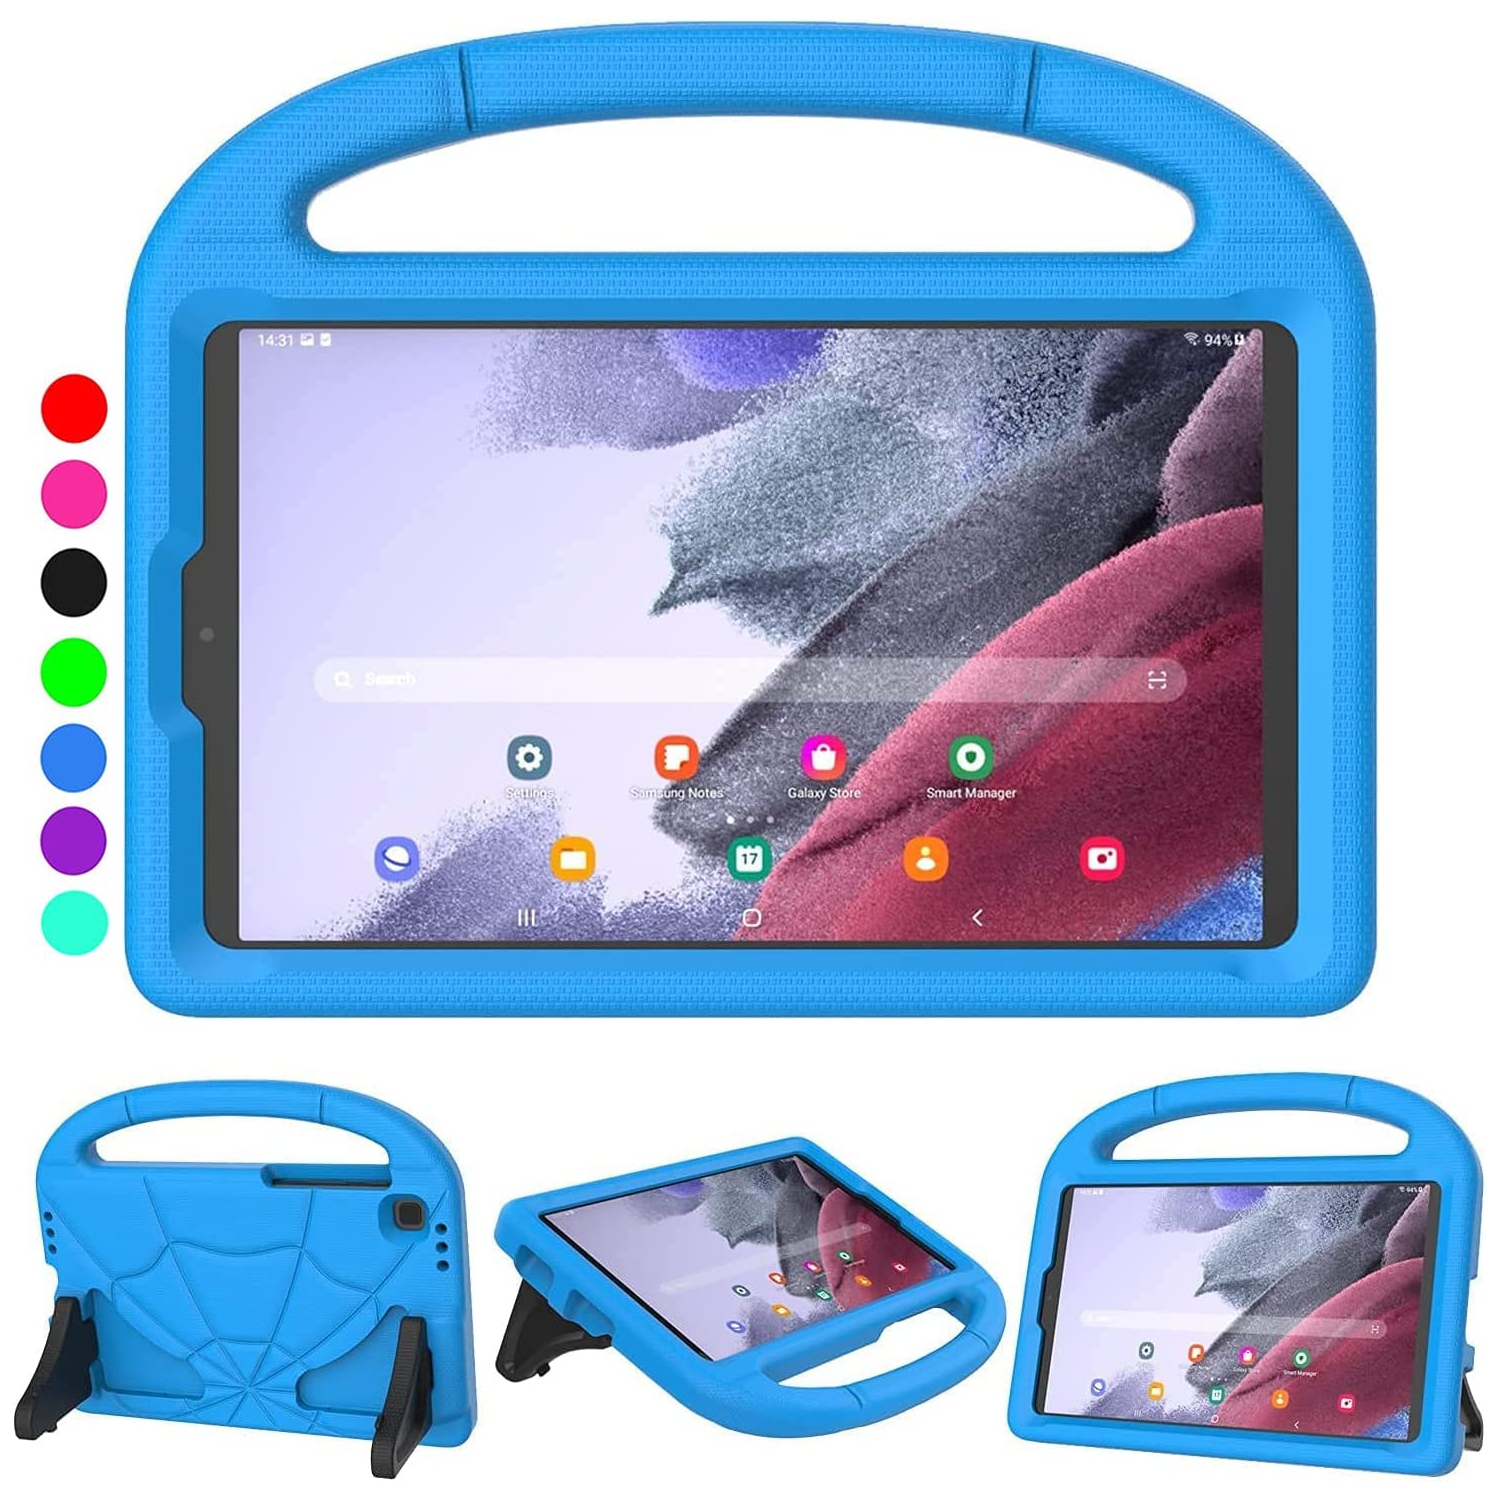 Kids Case for Samsung Galaxy Tab A7 Lite 8.7 Inch 2021, L Samsung Galaxy Tab A7 Lite Case Shockproof Kid-Proof Cover with Handle Stand for Galaxy Tab A7 Lite 8.7'' (SM-T220/T225/T2